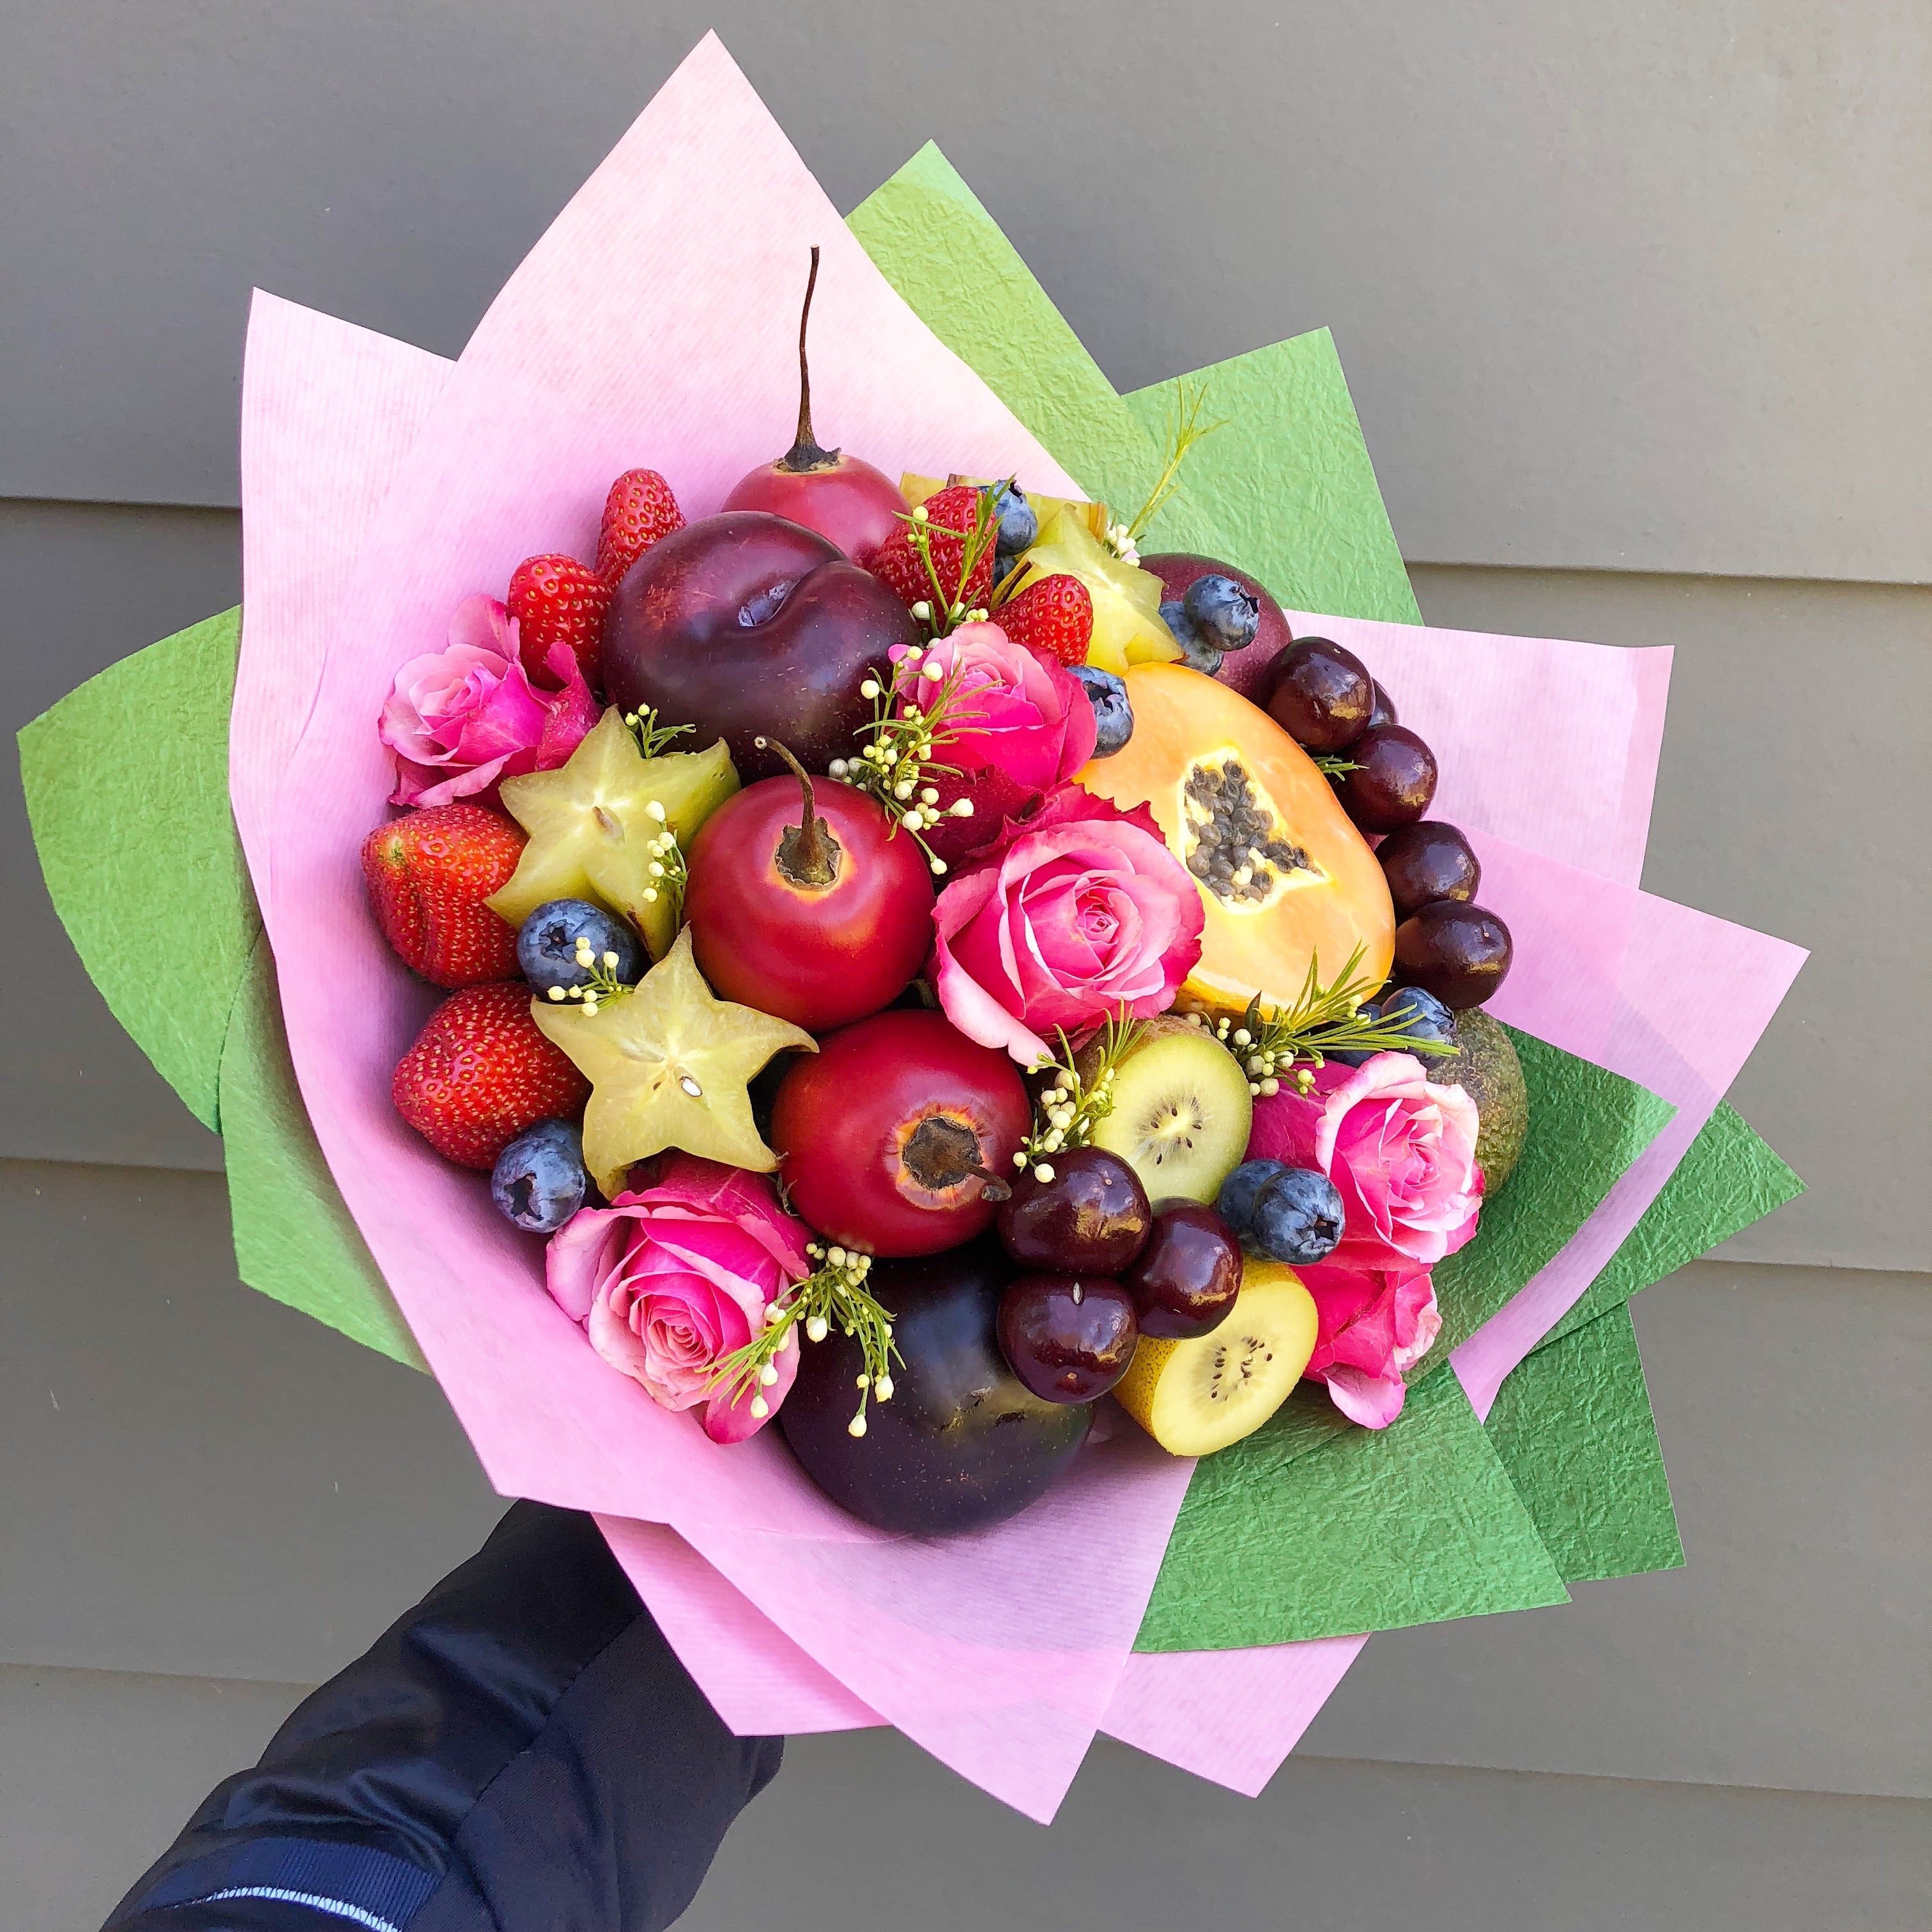 Mother's Day Gift Adelaide Delivery, Same Day Adelaide, Chocolate Box delivery, Mother's Day Bouquet, Mothers Day Dessert Box online, send chocolate strawberry box, donut bouquet same day delivery.